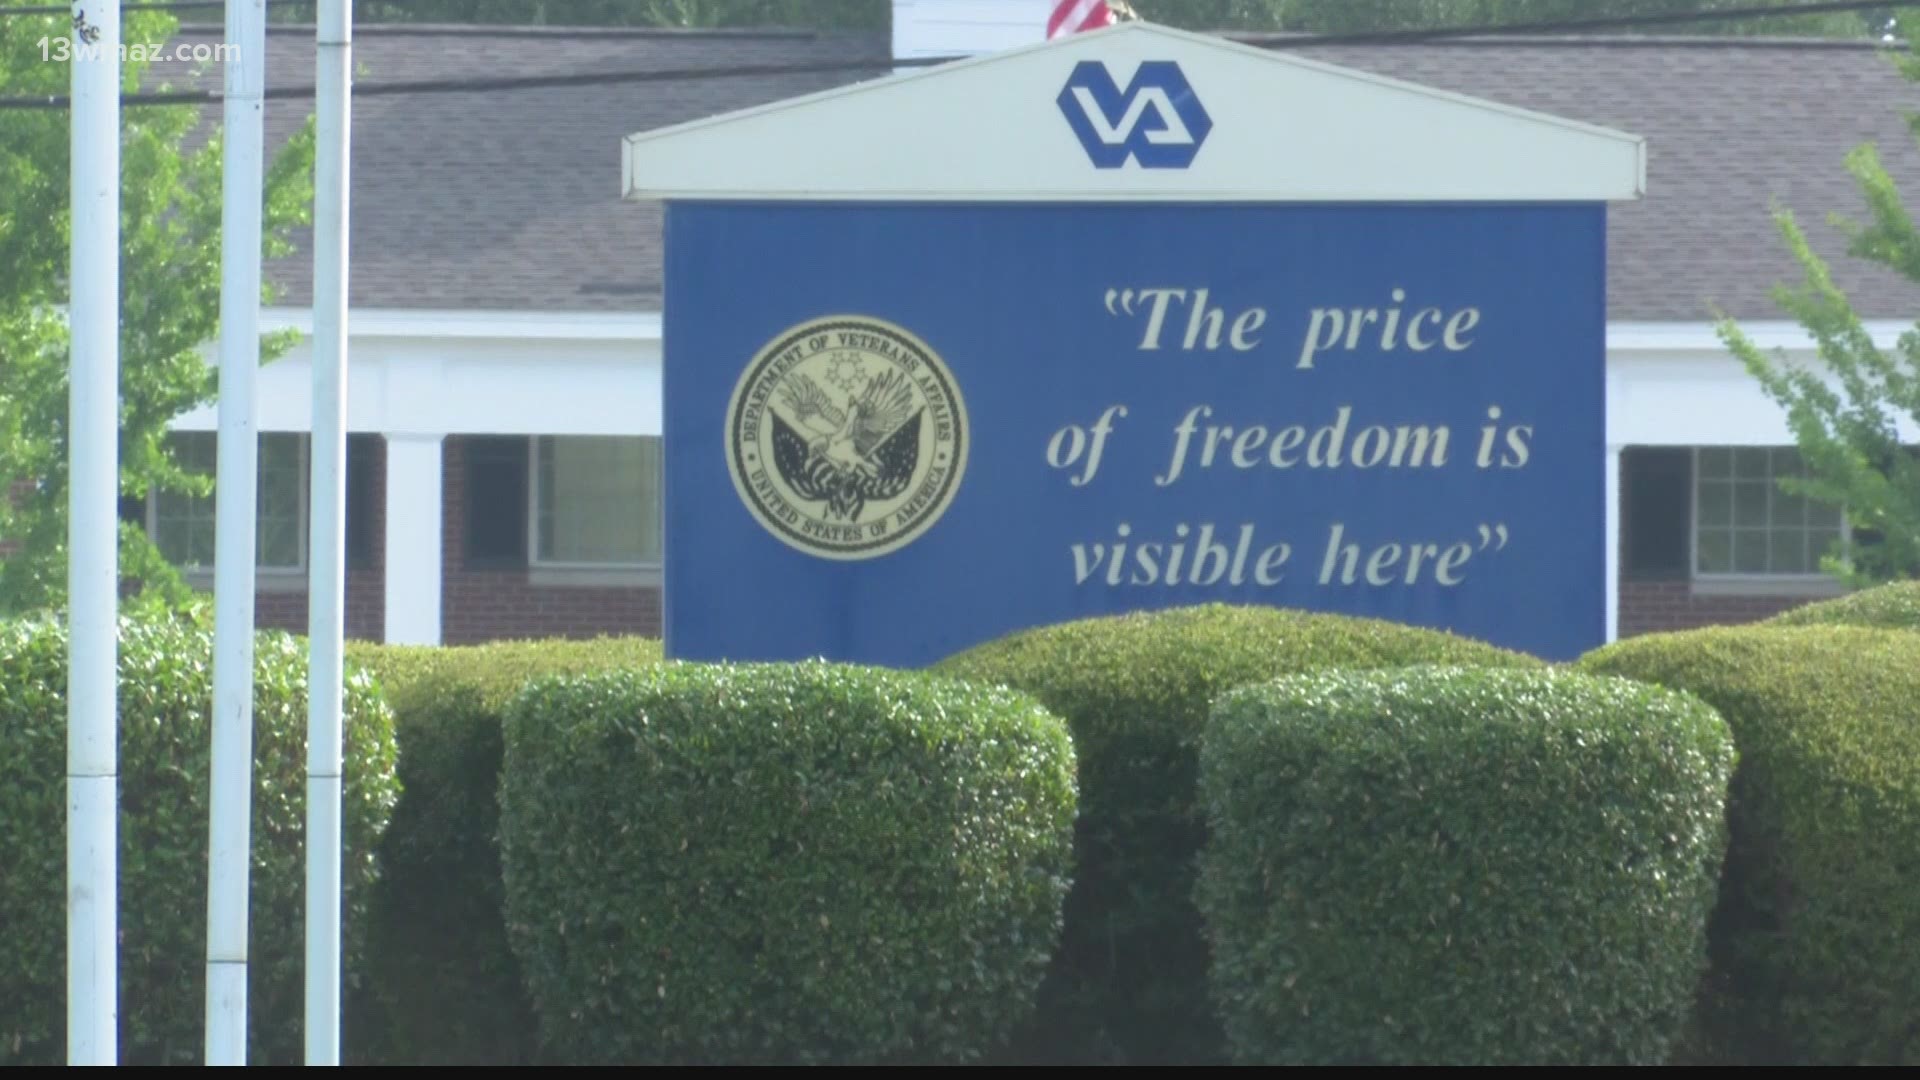 Phase three includes new technology and allowing veterans to have visitors.